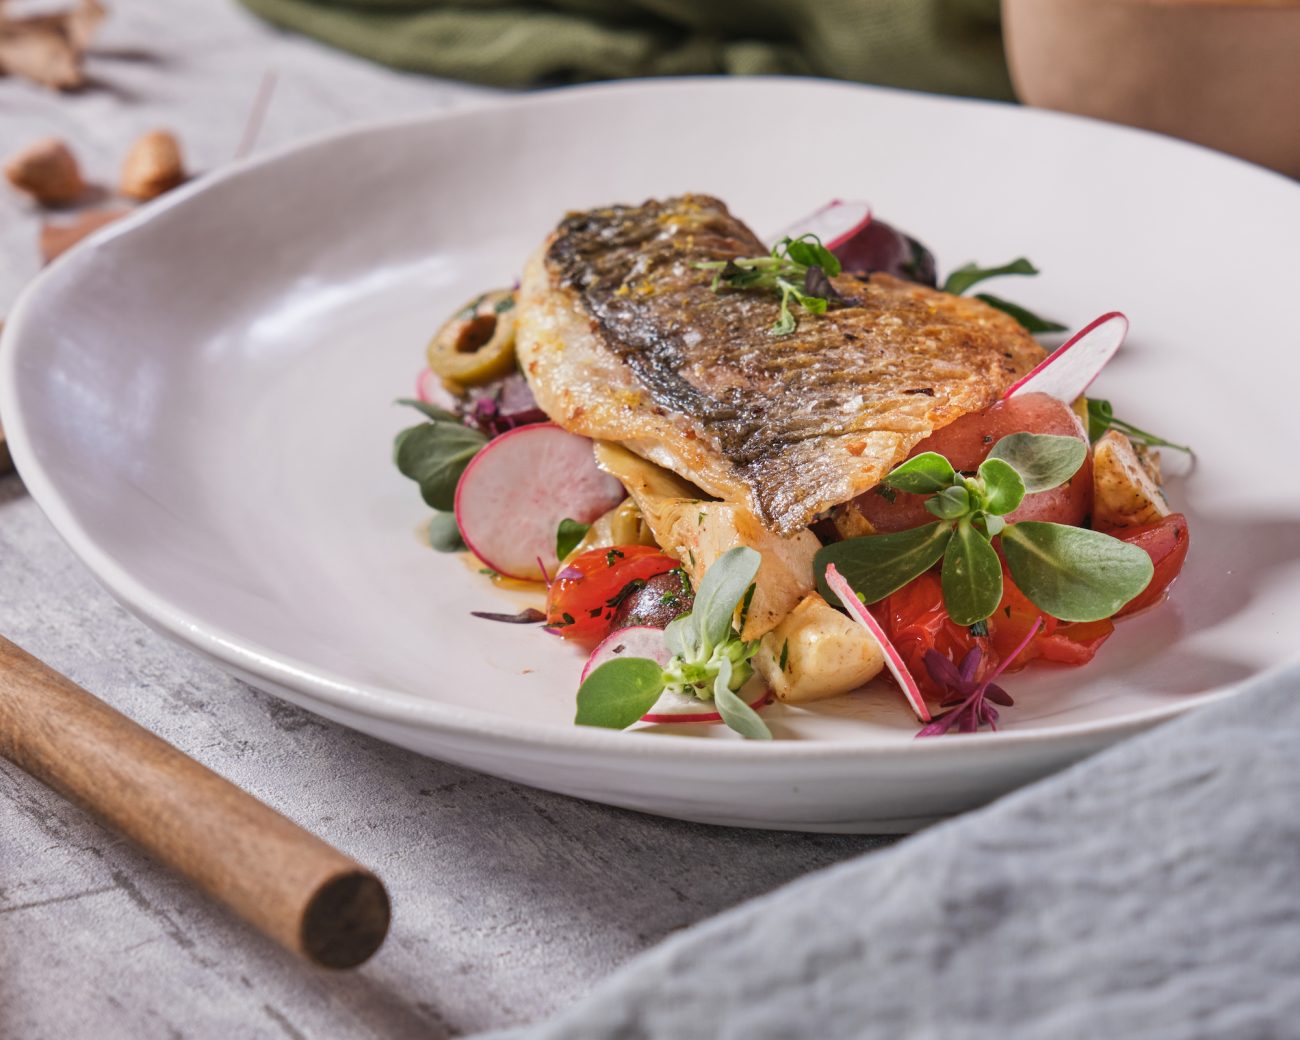 Fragrant Bream Fillet with Artichokes, Cherry Tomatoes and Green Olives served with Baby Potatoes